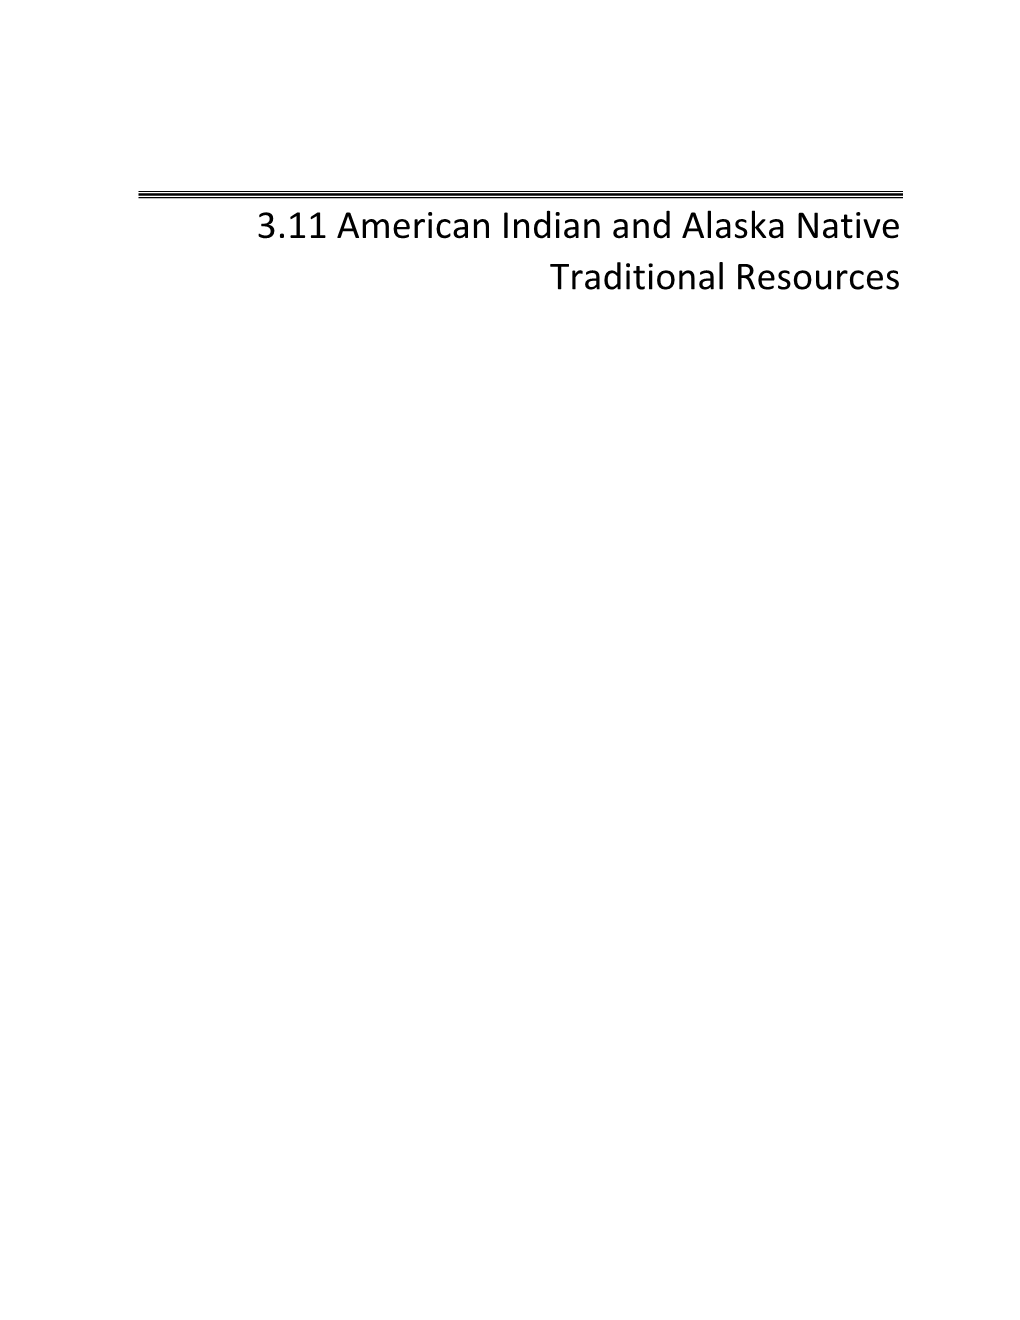 American Indian and Alaska Native Traditional Resources